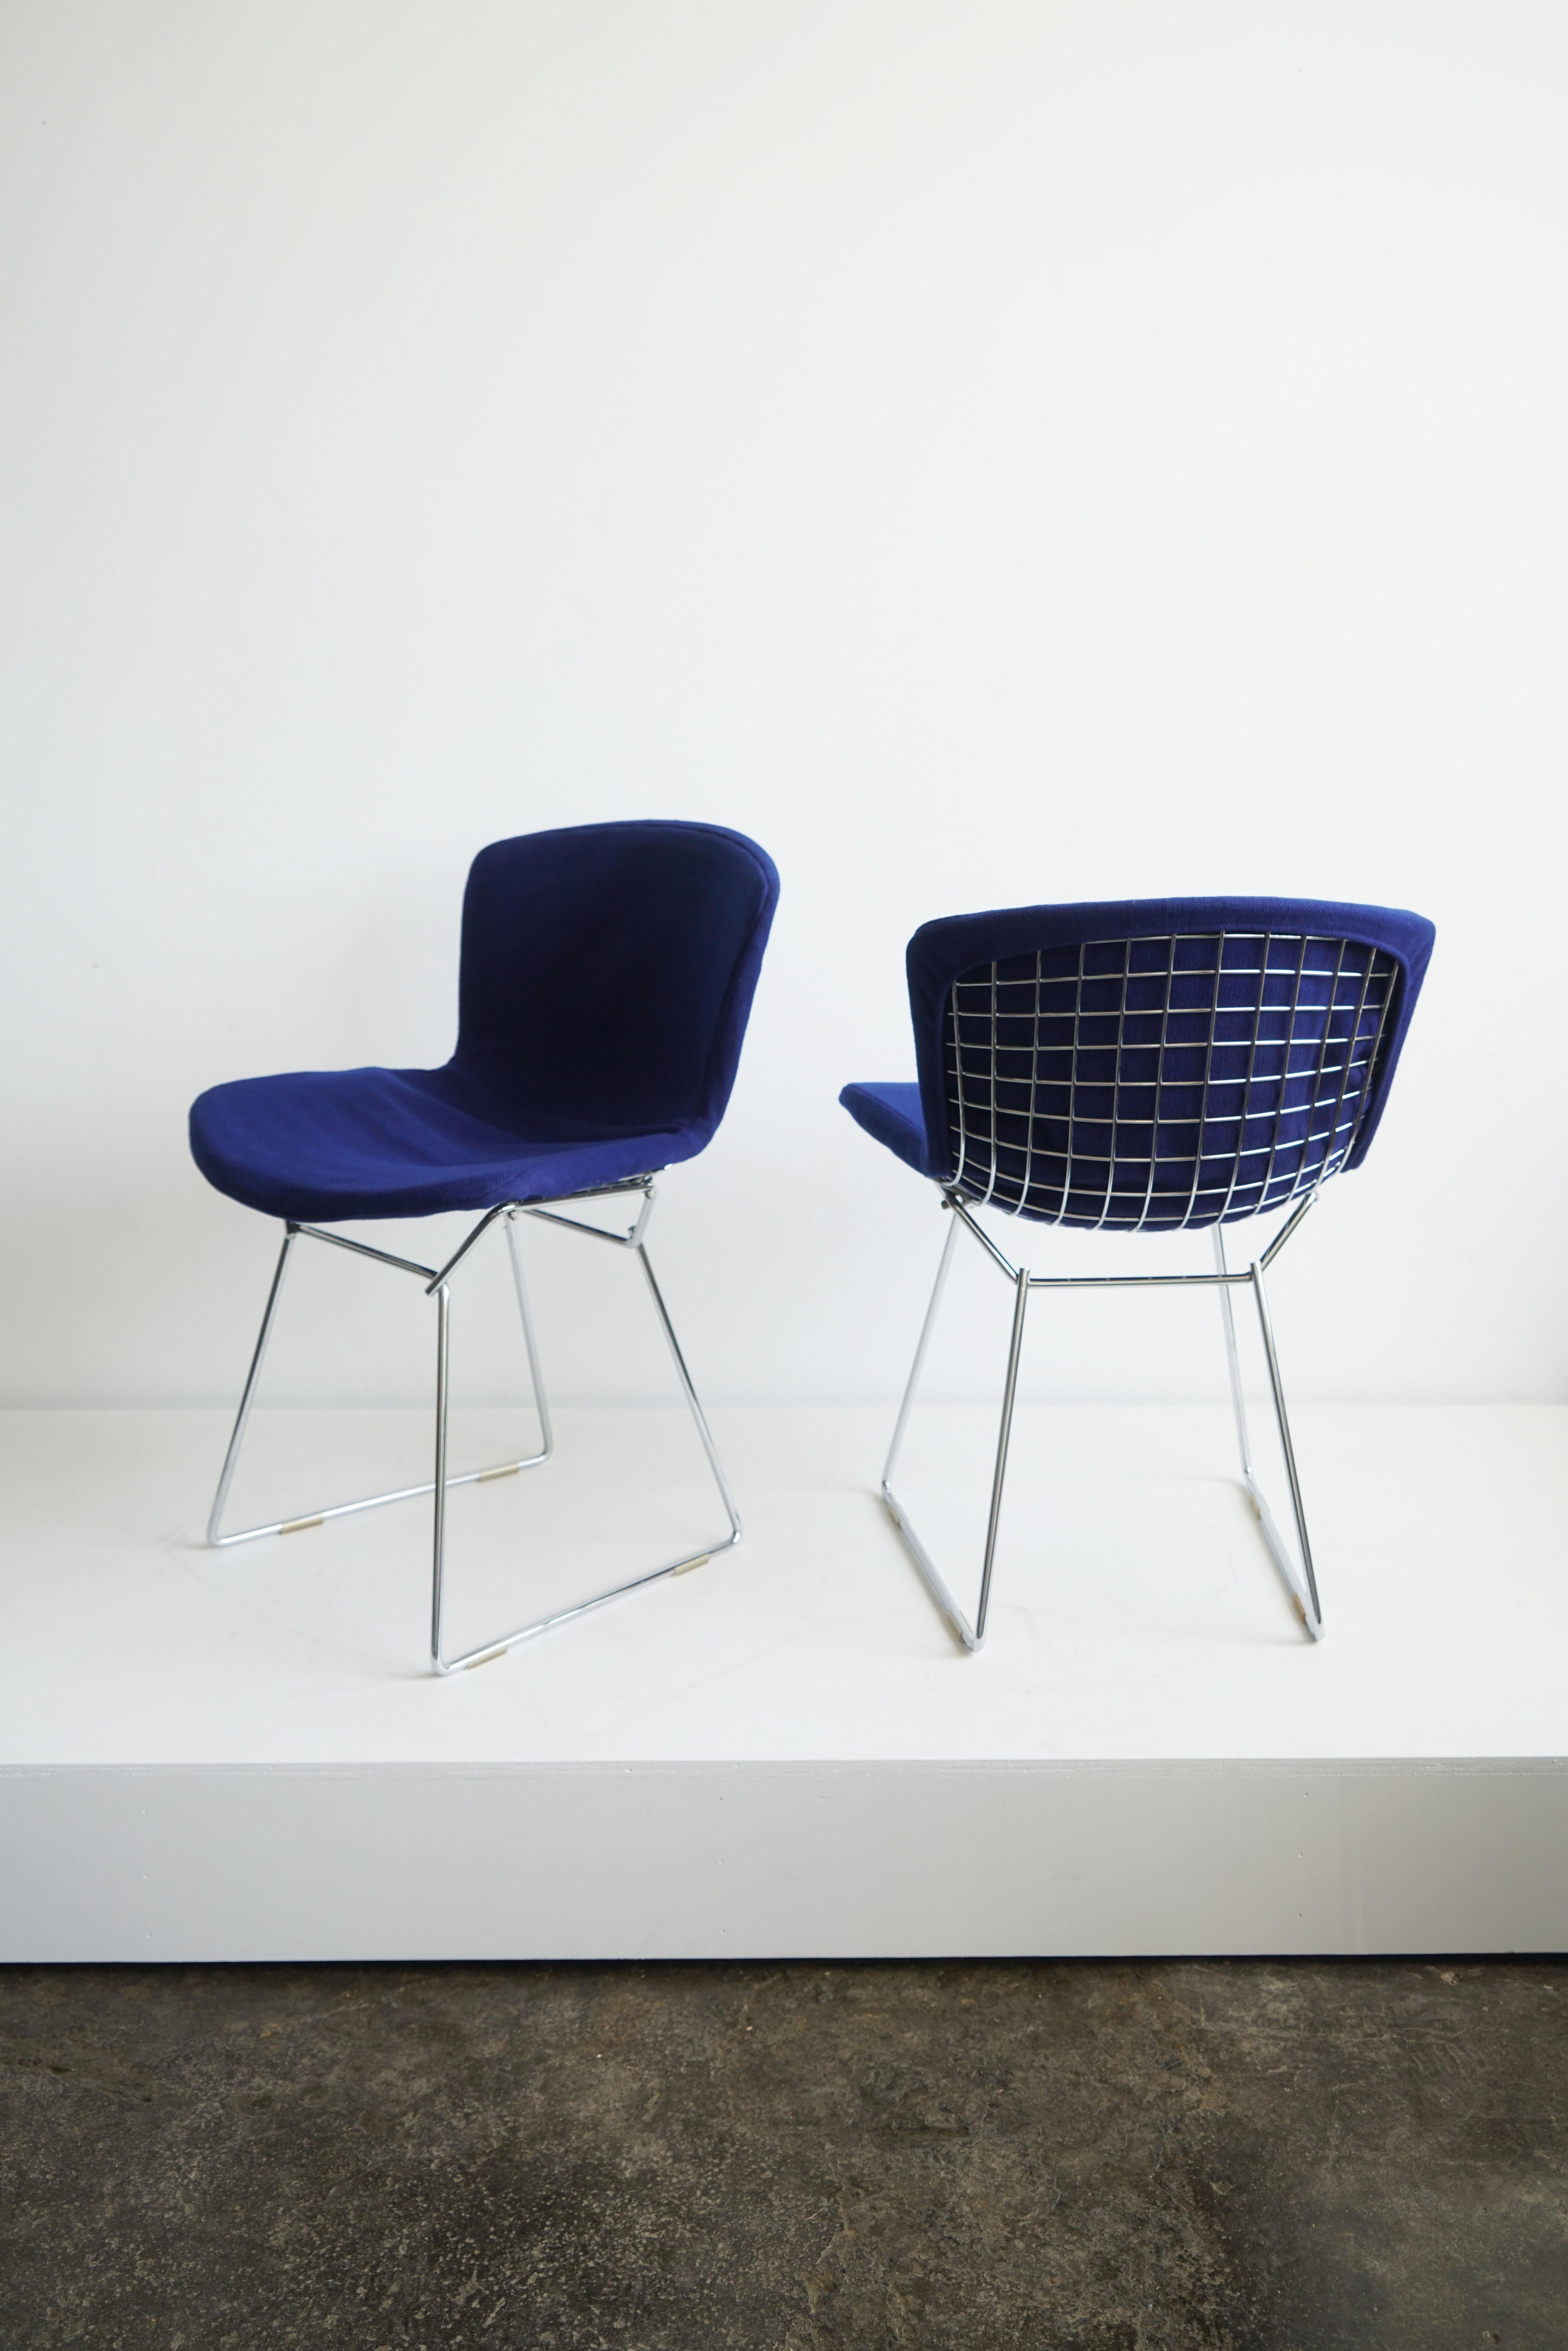 Pair of Harry Bertoia side chairs
by Knoll International, 1978

Two available, price is per chair.

With original blue upholstery.
Manufacturer's label dated 1978. 
New internal foam. 

Harry Bertoia's iconic wire form furniture collection,